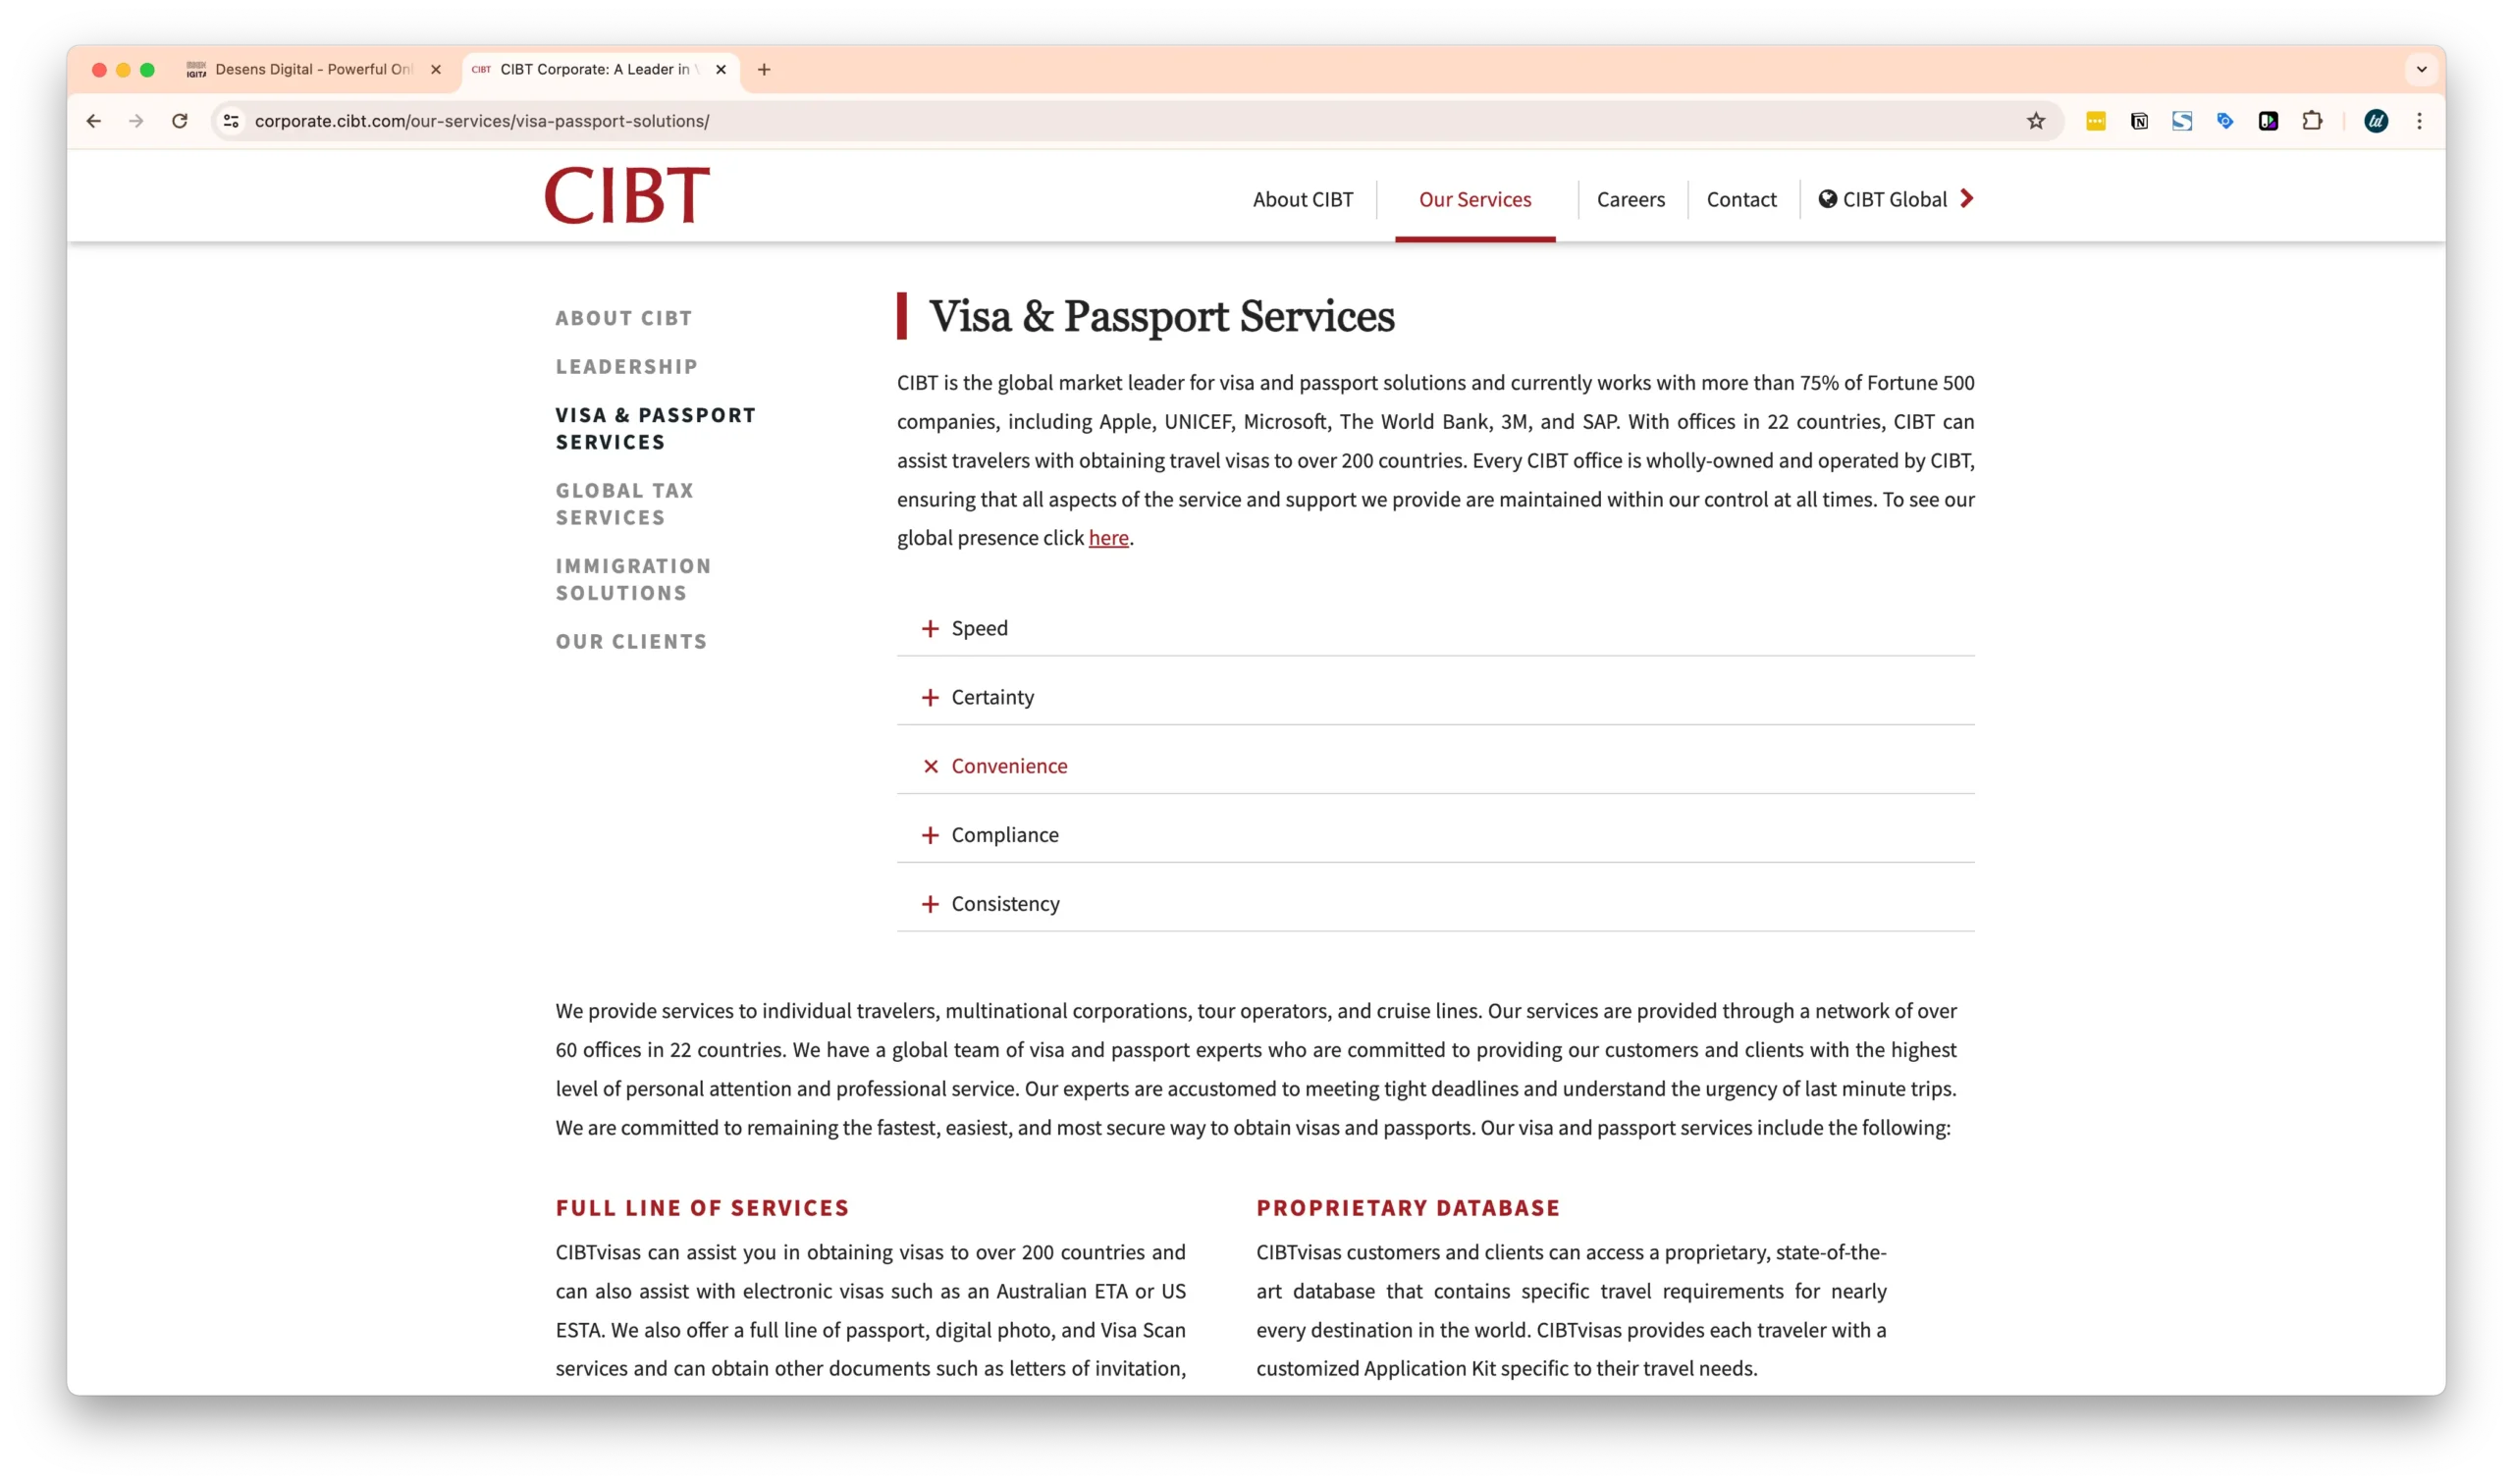 A webpage detailing CIBT's visa and passport services, emphasizing speed, certainty, compliance, and consistency. The navigation menu on the left highlights other services and information about the company.